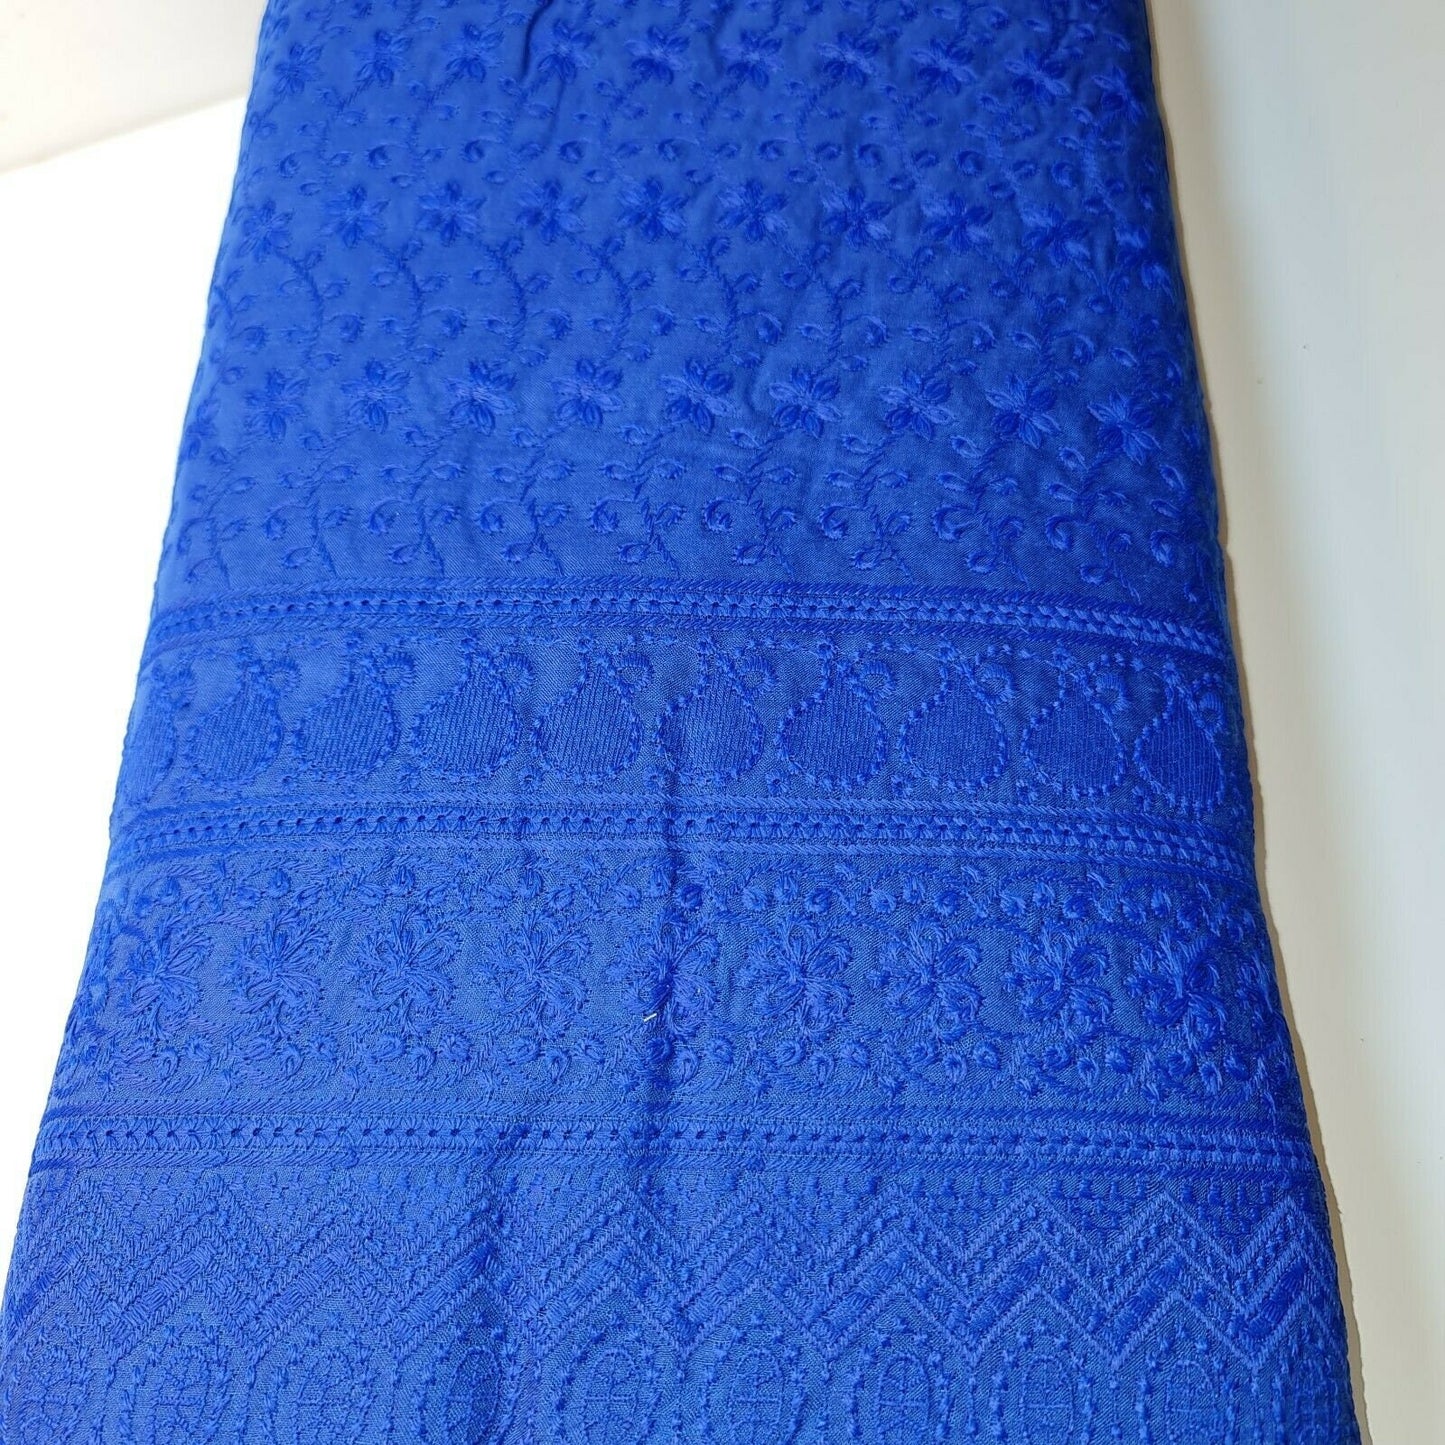 NEW SPRING 100% Cotton Lawn Broderie Anglaise Embroidery Dress Craft Fabric 44" (Royal Blue)